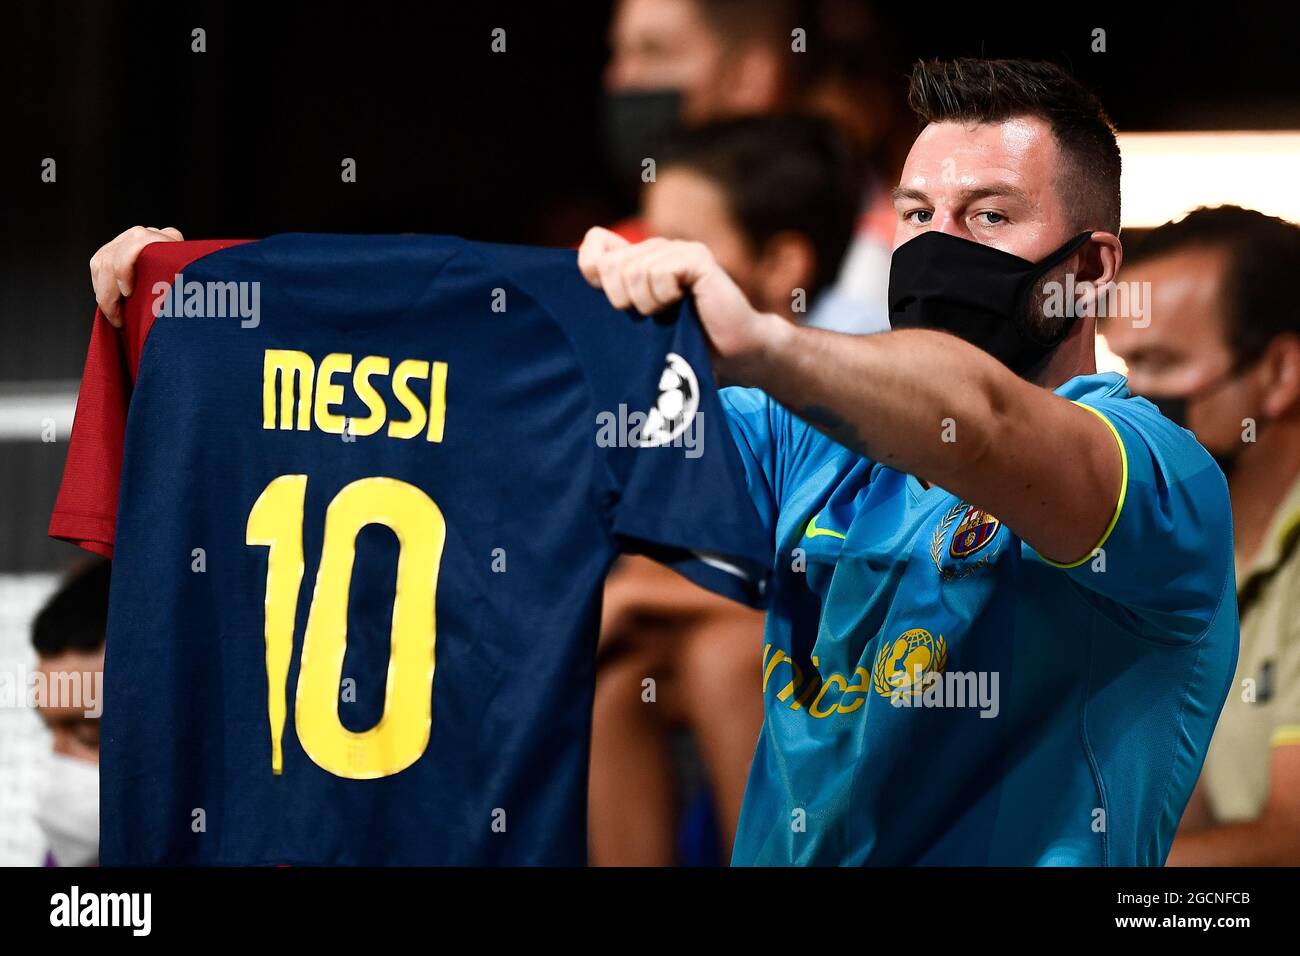 Sant Joan Despi, Spain. 08 August 2021. Fan of FC Barcelona shows a shirt of Lionel Messi during the pre-season friendly football match between FC Barcelona and Juventus FC. FC Barcelona won 3-0 over Juventus FC. Credit: Nicolò Campo/Alamy Live News Stock Photo